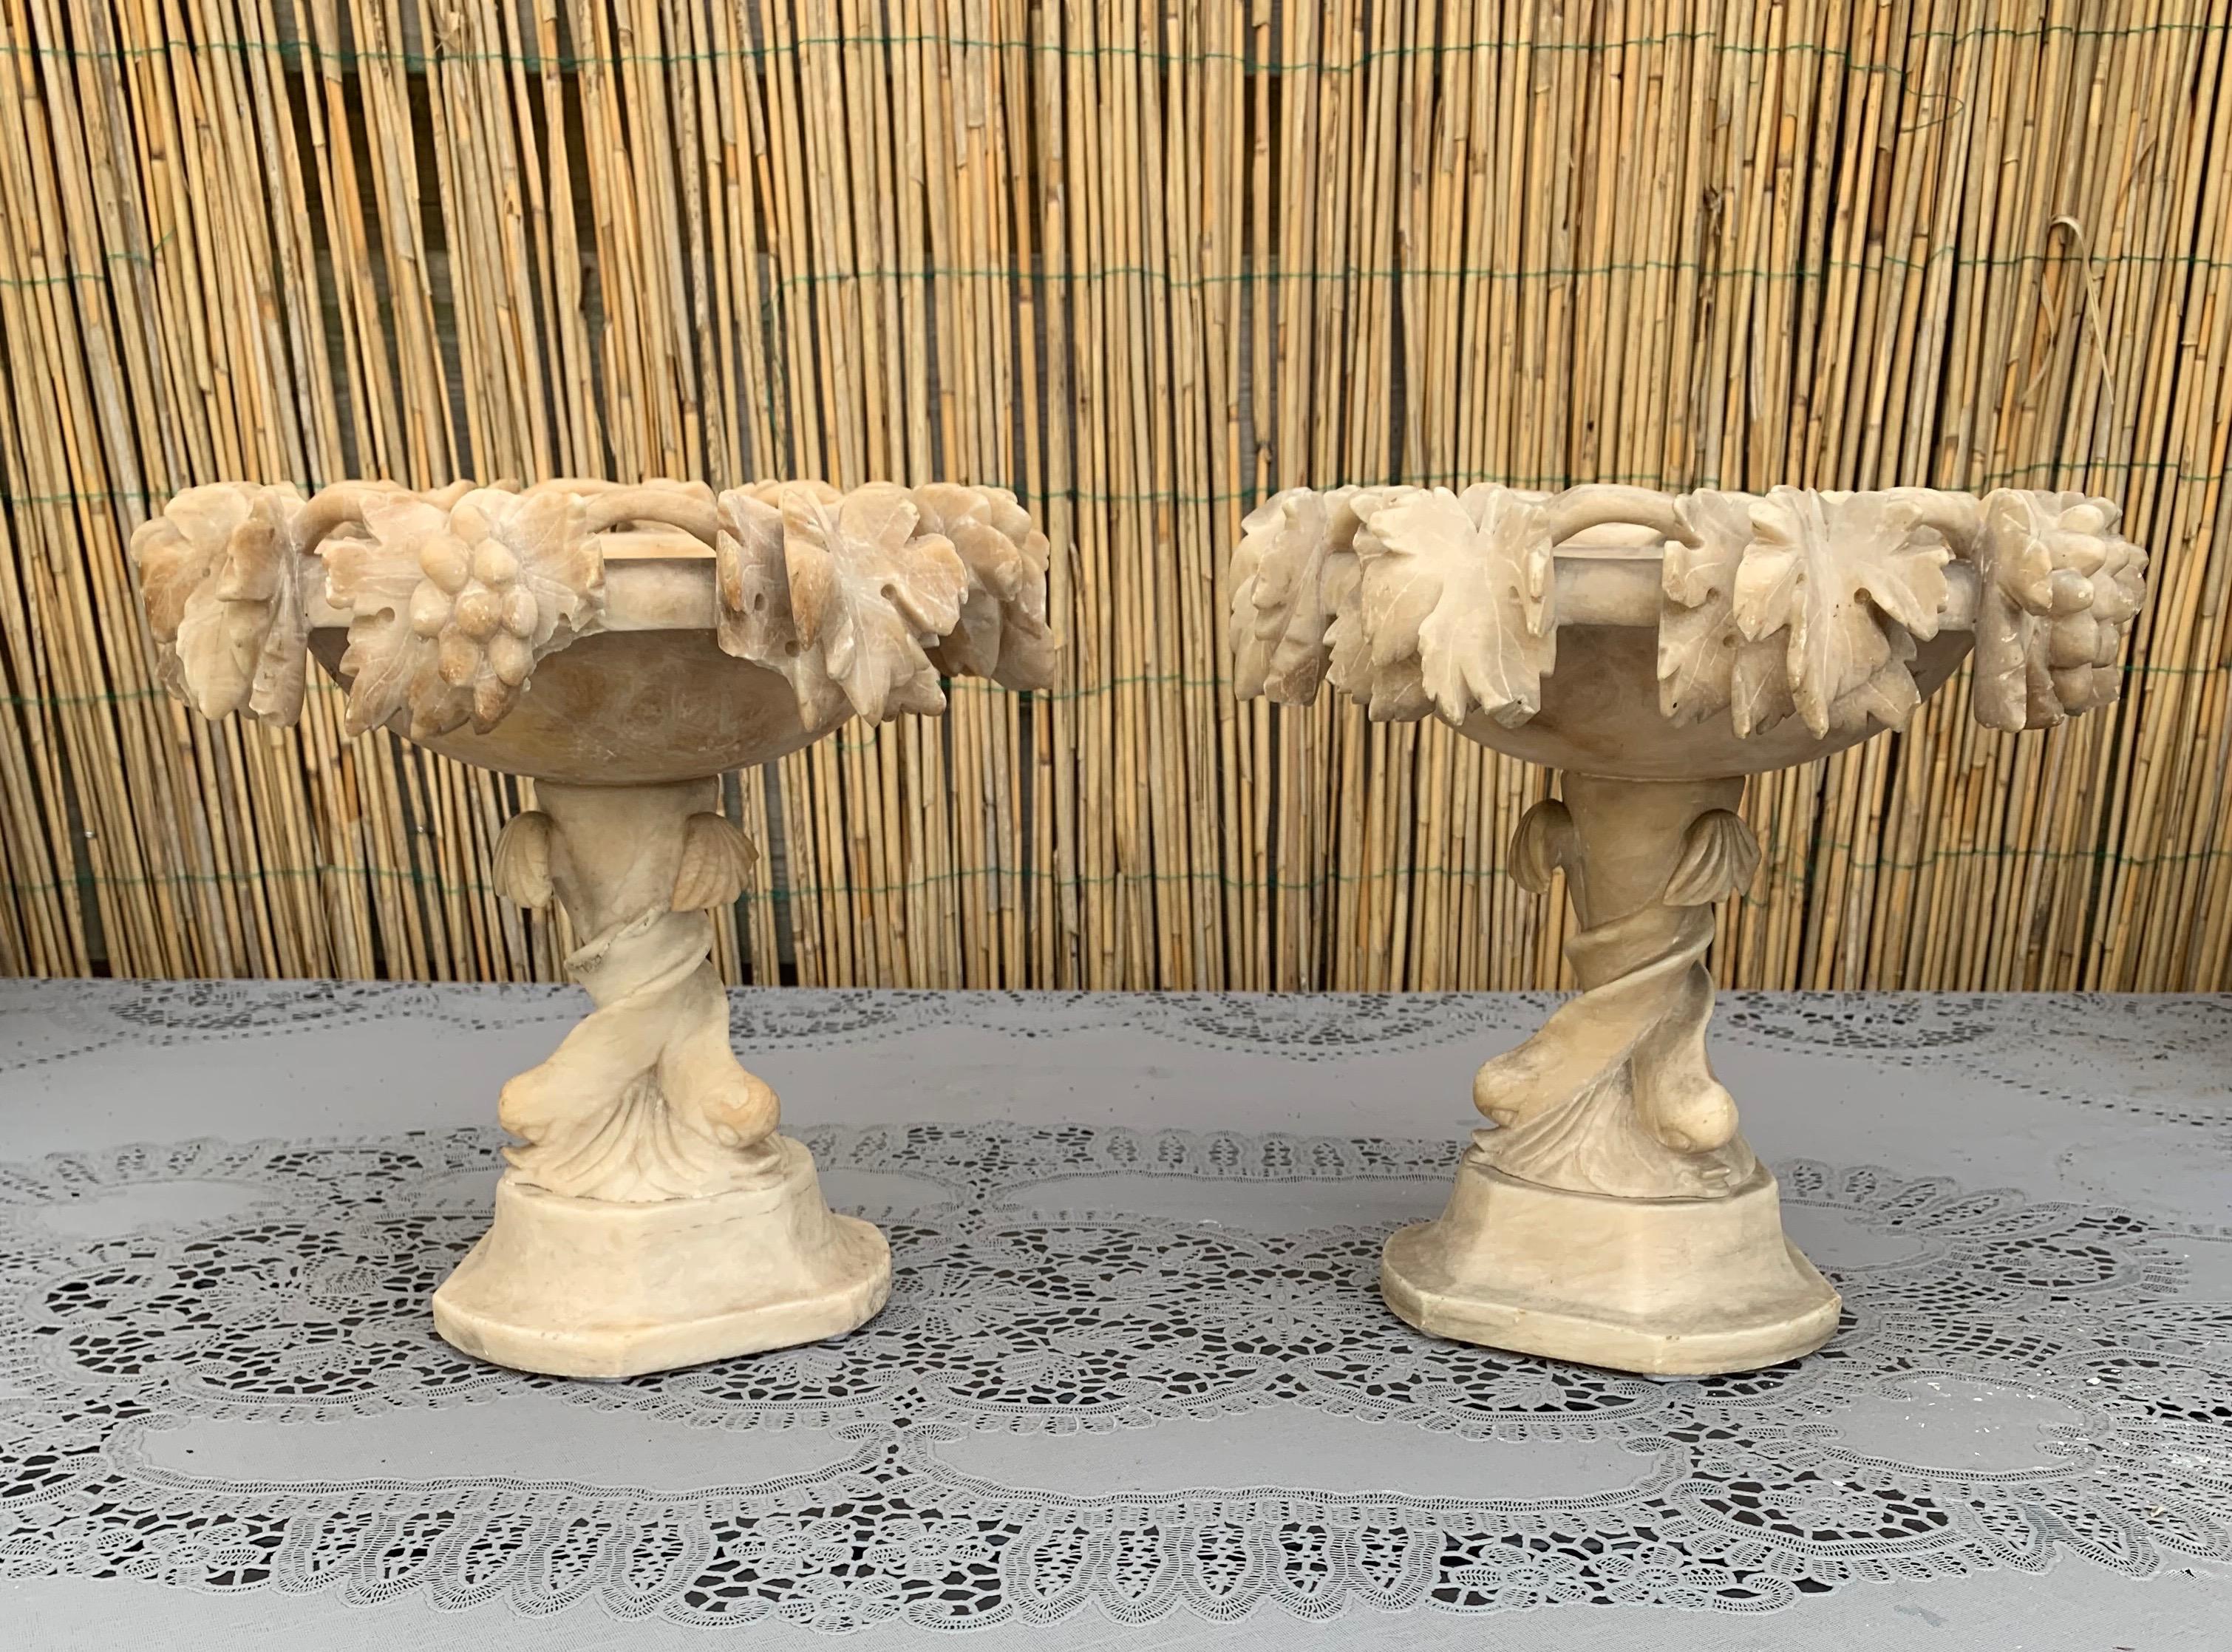 All handcrafted out of alabaster these stylish & decorative tazzas make great centrepieces.

This rare pair of 19th century tazzas comes with overhanging wine branches all around the circular tops. Finding this pair of Renaissance Revival tazzas